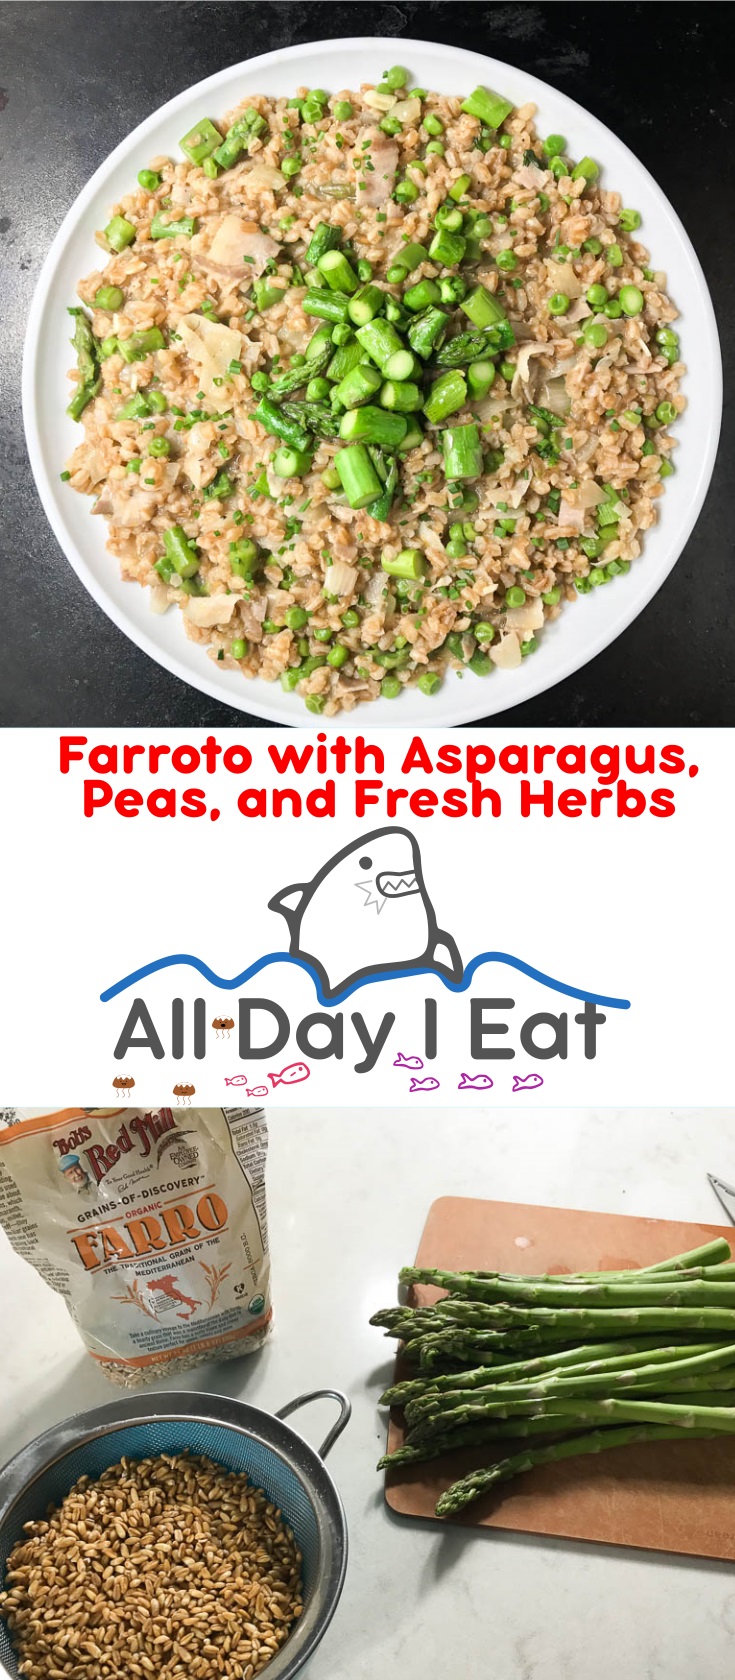 Farroto with asparagus, peas, and fresh herbs is the perfect weeknight meal for those who love the little grain called farro. The earthy nutty flavor of farro is complemented by blanched, slightly crunchy green asparagus, green peas, and prosciutto. This is definitely one of my favorite farro recipes! | www.alldayieat.com